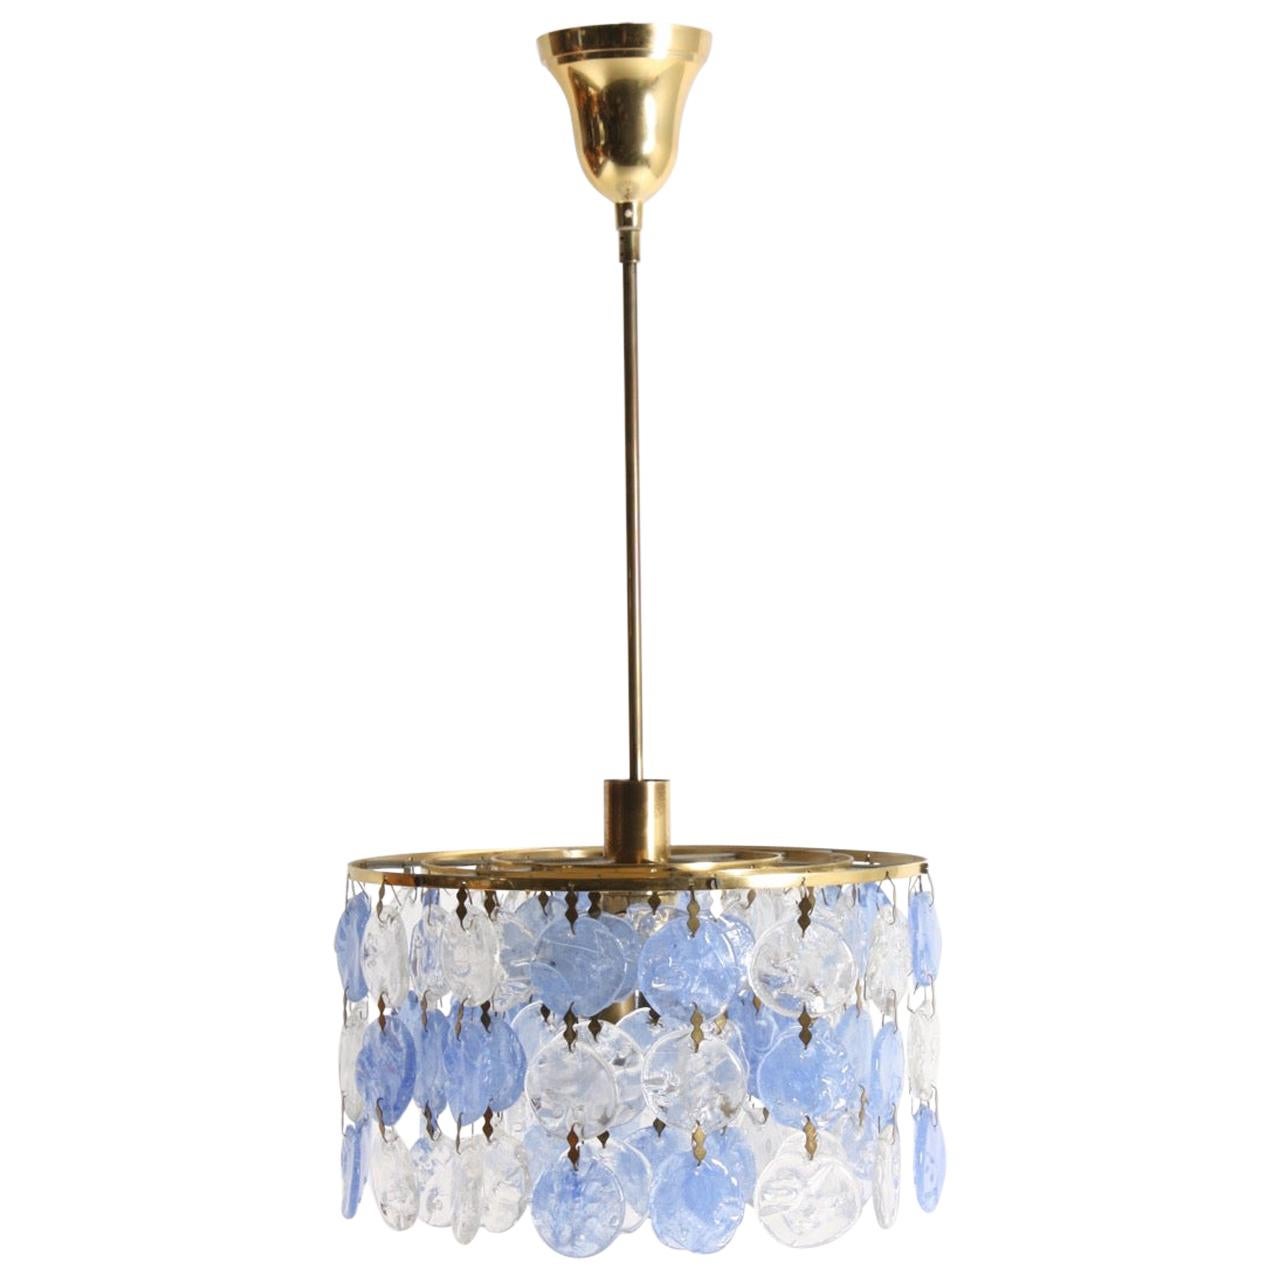 Midcentury Italian Chandelier in Brass and Colored Glass, 1960s For Sale